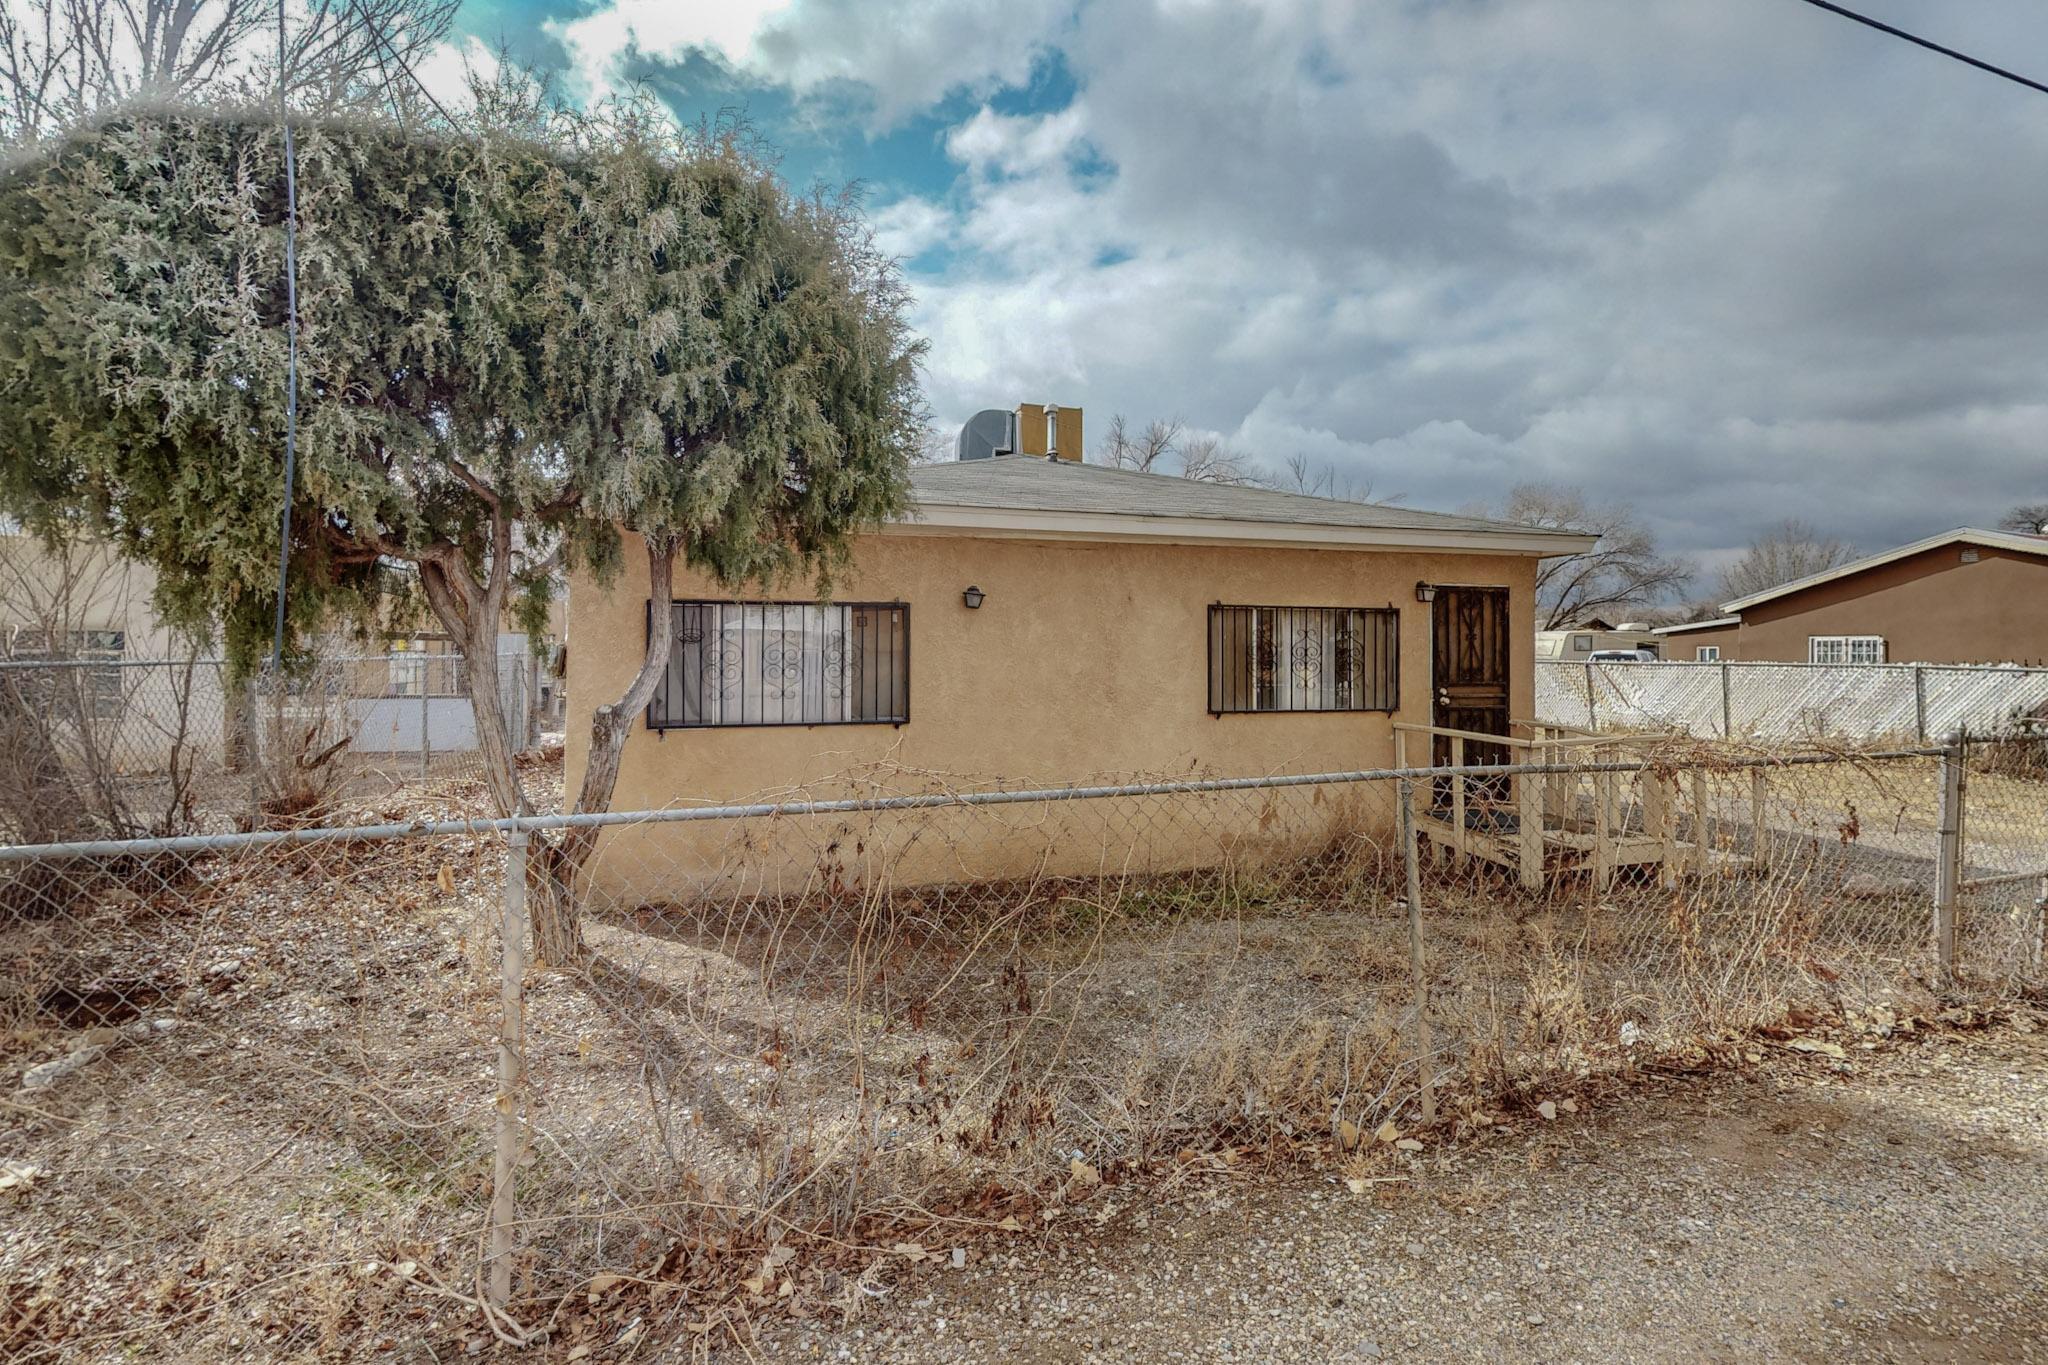 Starter home, downsize or just looking for a peaceful setting in the Valley! This little Charmer is ready for new owners!